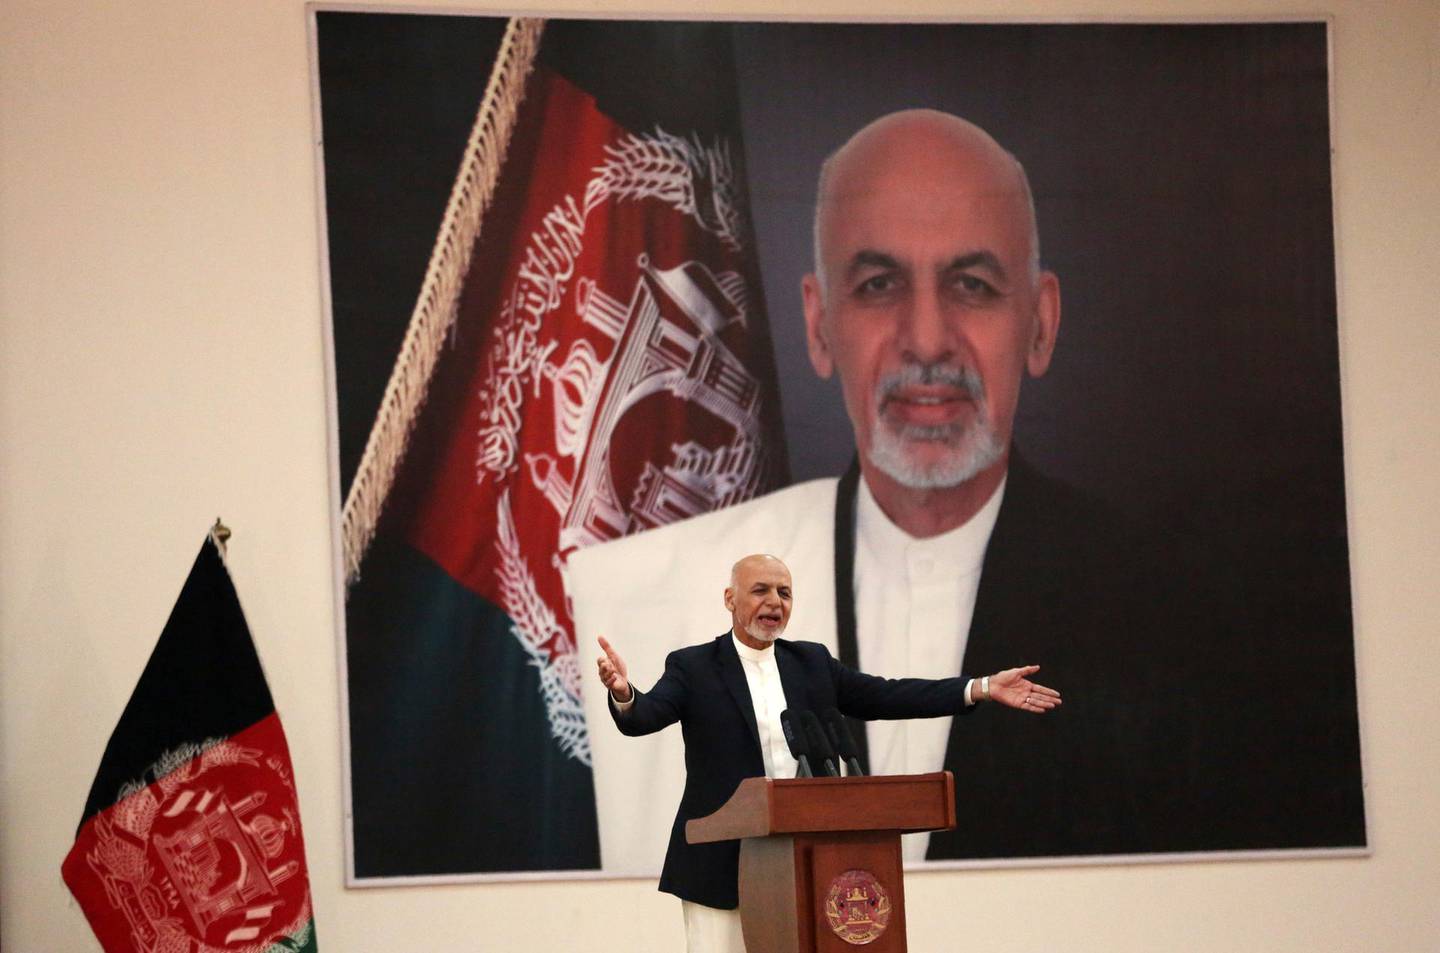 FILE - In this Sept. 9, 2019, file photo, Afghan President Ashraf Ghani speaks during a ceremony to introduce the new chief of the intelligence service, in Kabul, Afghanistan. President Donald Trump's halt to U.S.-Taliban talks looks like a gift to the beleaguered Afghan president, who has insisted on holding a key election in less than three weeksâ€™ time despite widespread expectations that a peace deal would push it aside. (AP Photo/Rahmat Gul, File)